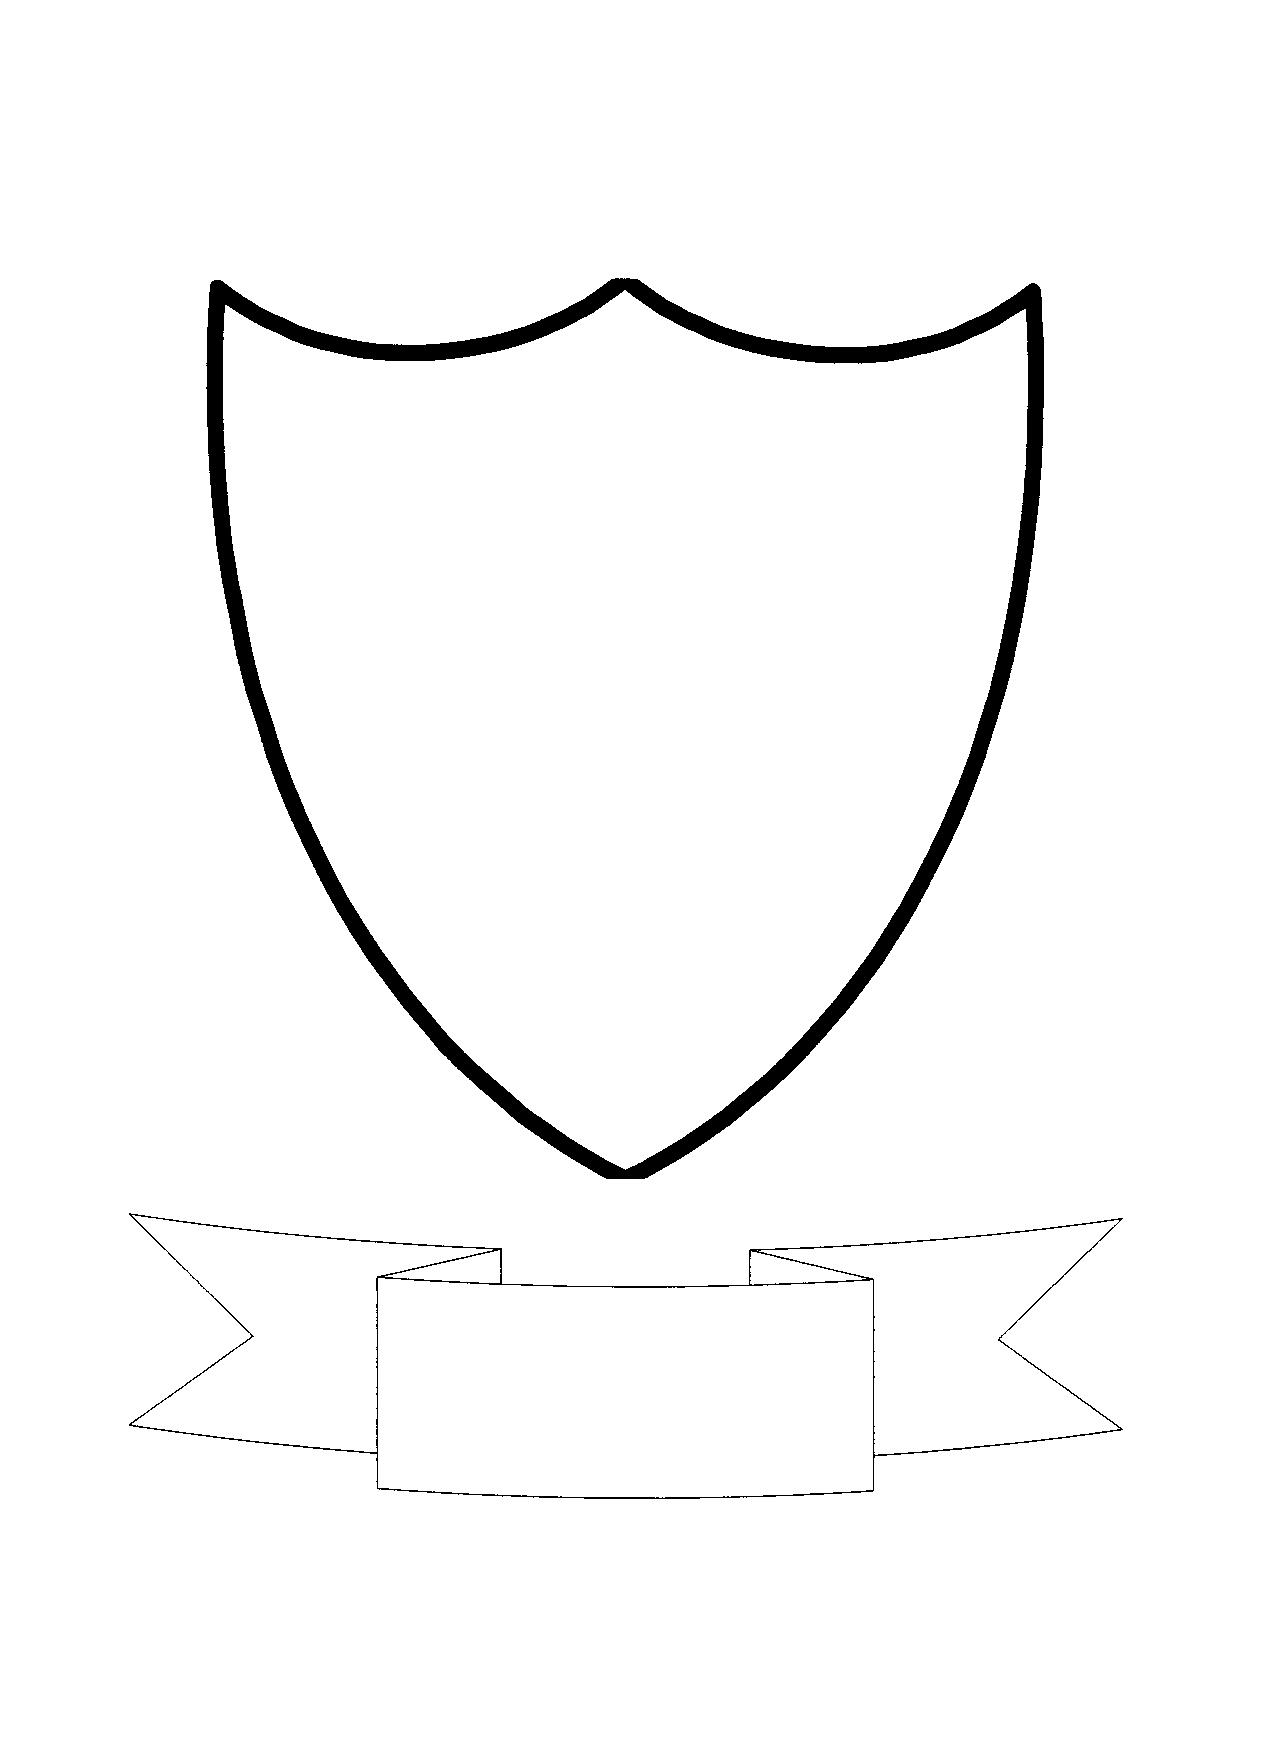 Coat arms template.